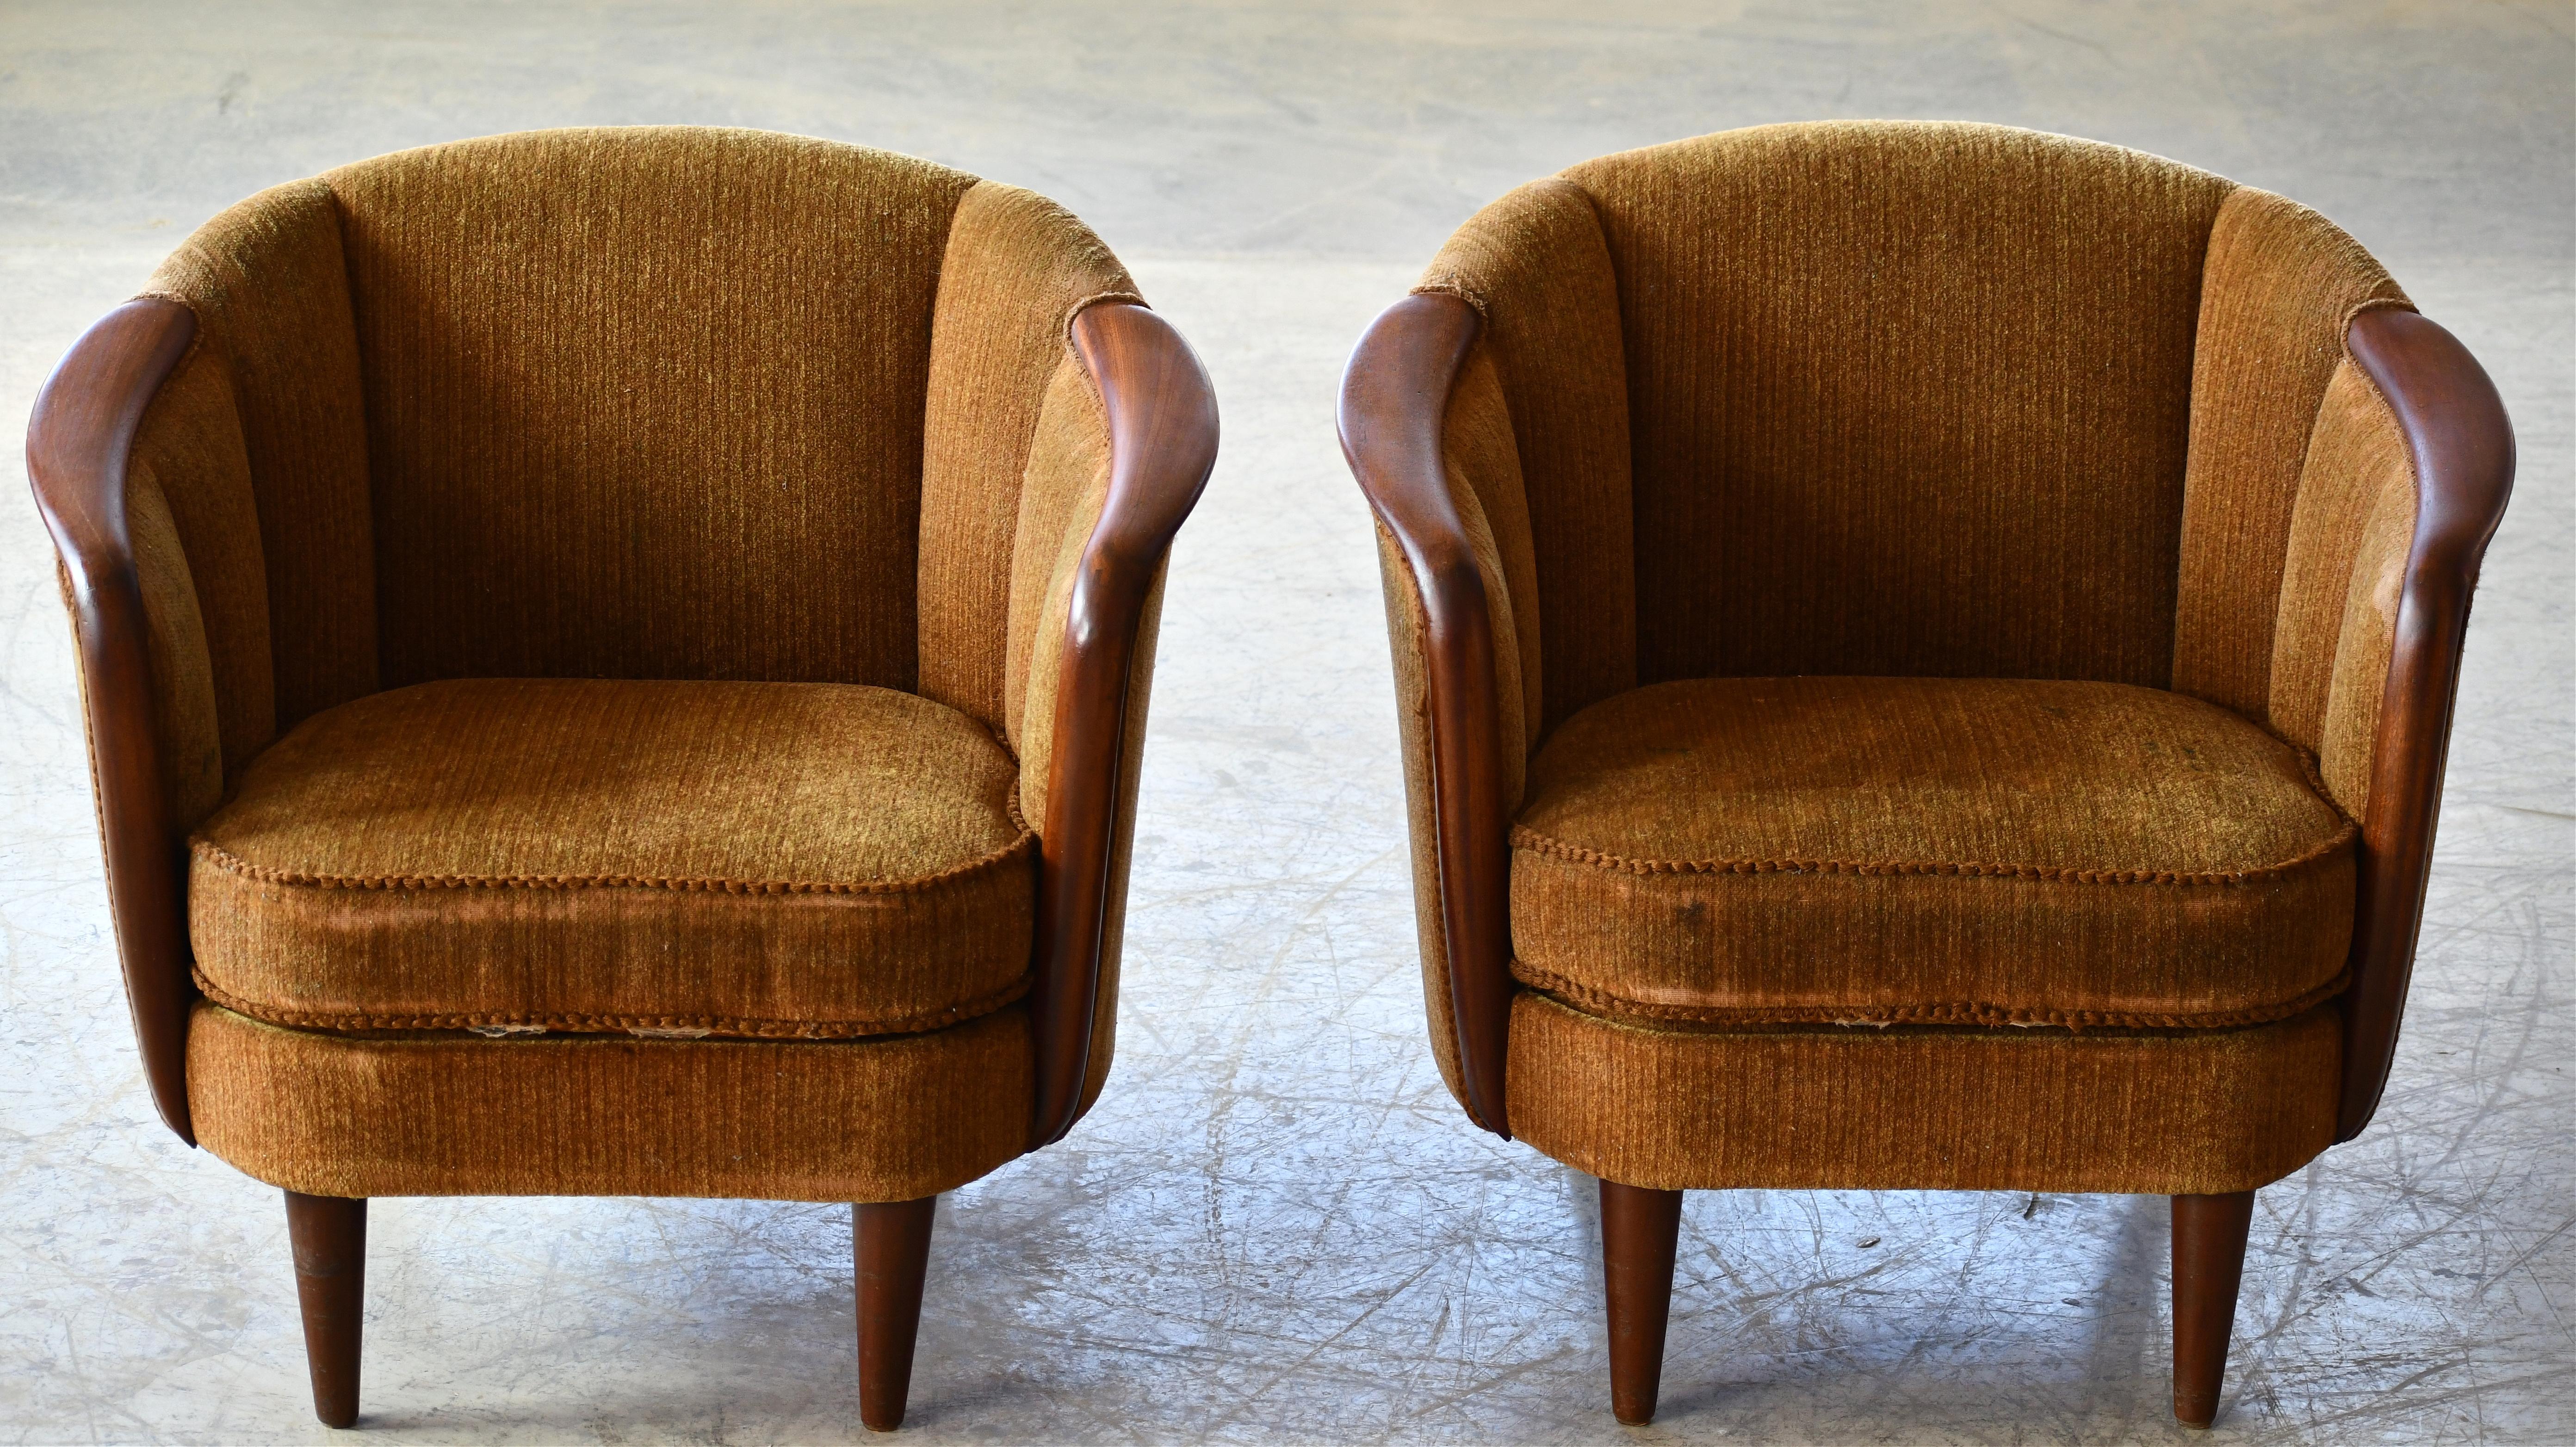 Pair of Rare Danish 1950's Barrel Style Chairs with Teak Armrests In Good Condition For Sale In Bridgeport, CT